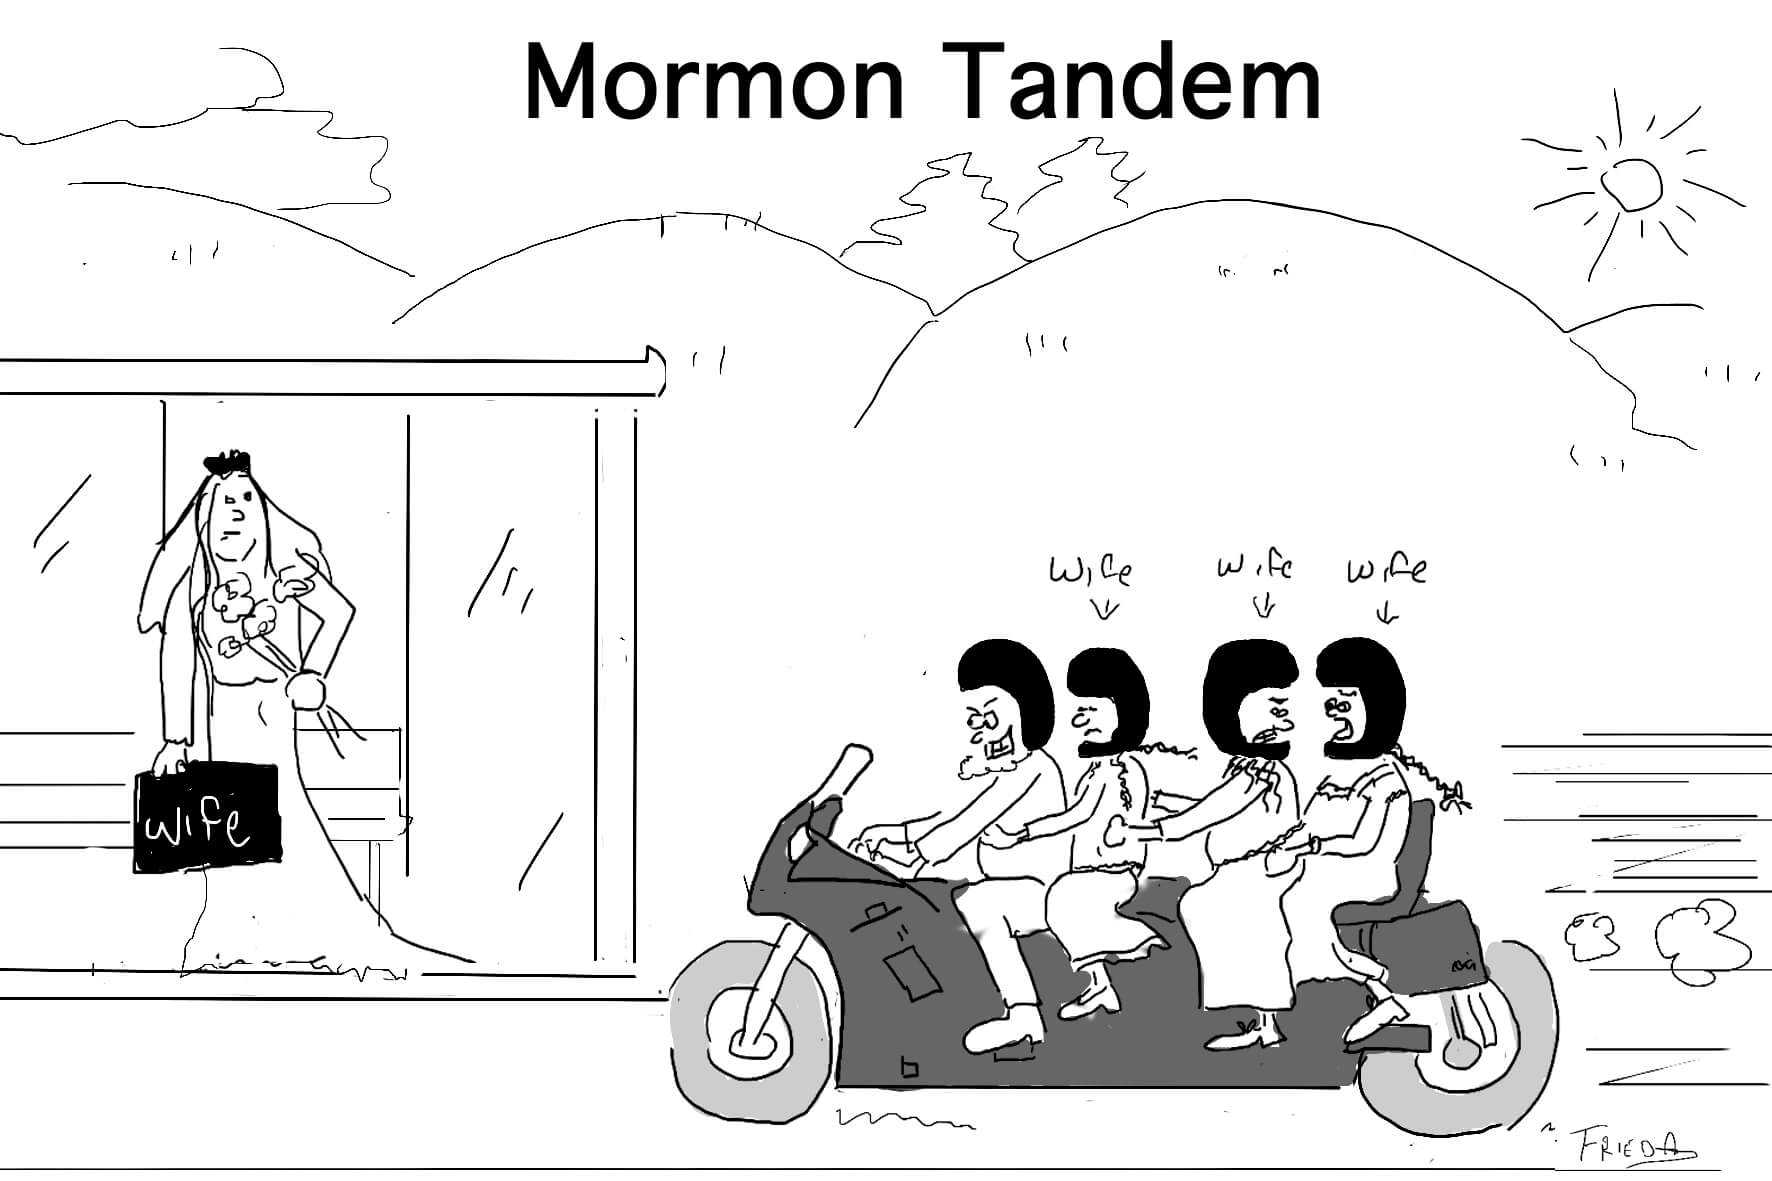 Mormon wives riding with their husband on a tandem motorcycle to meet a new wife